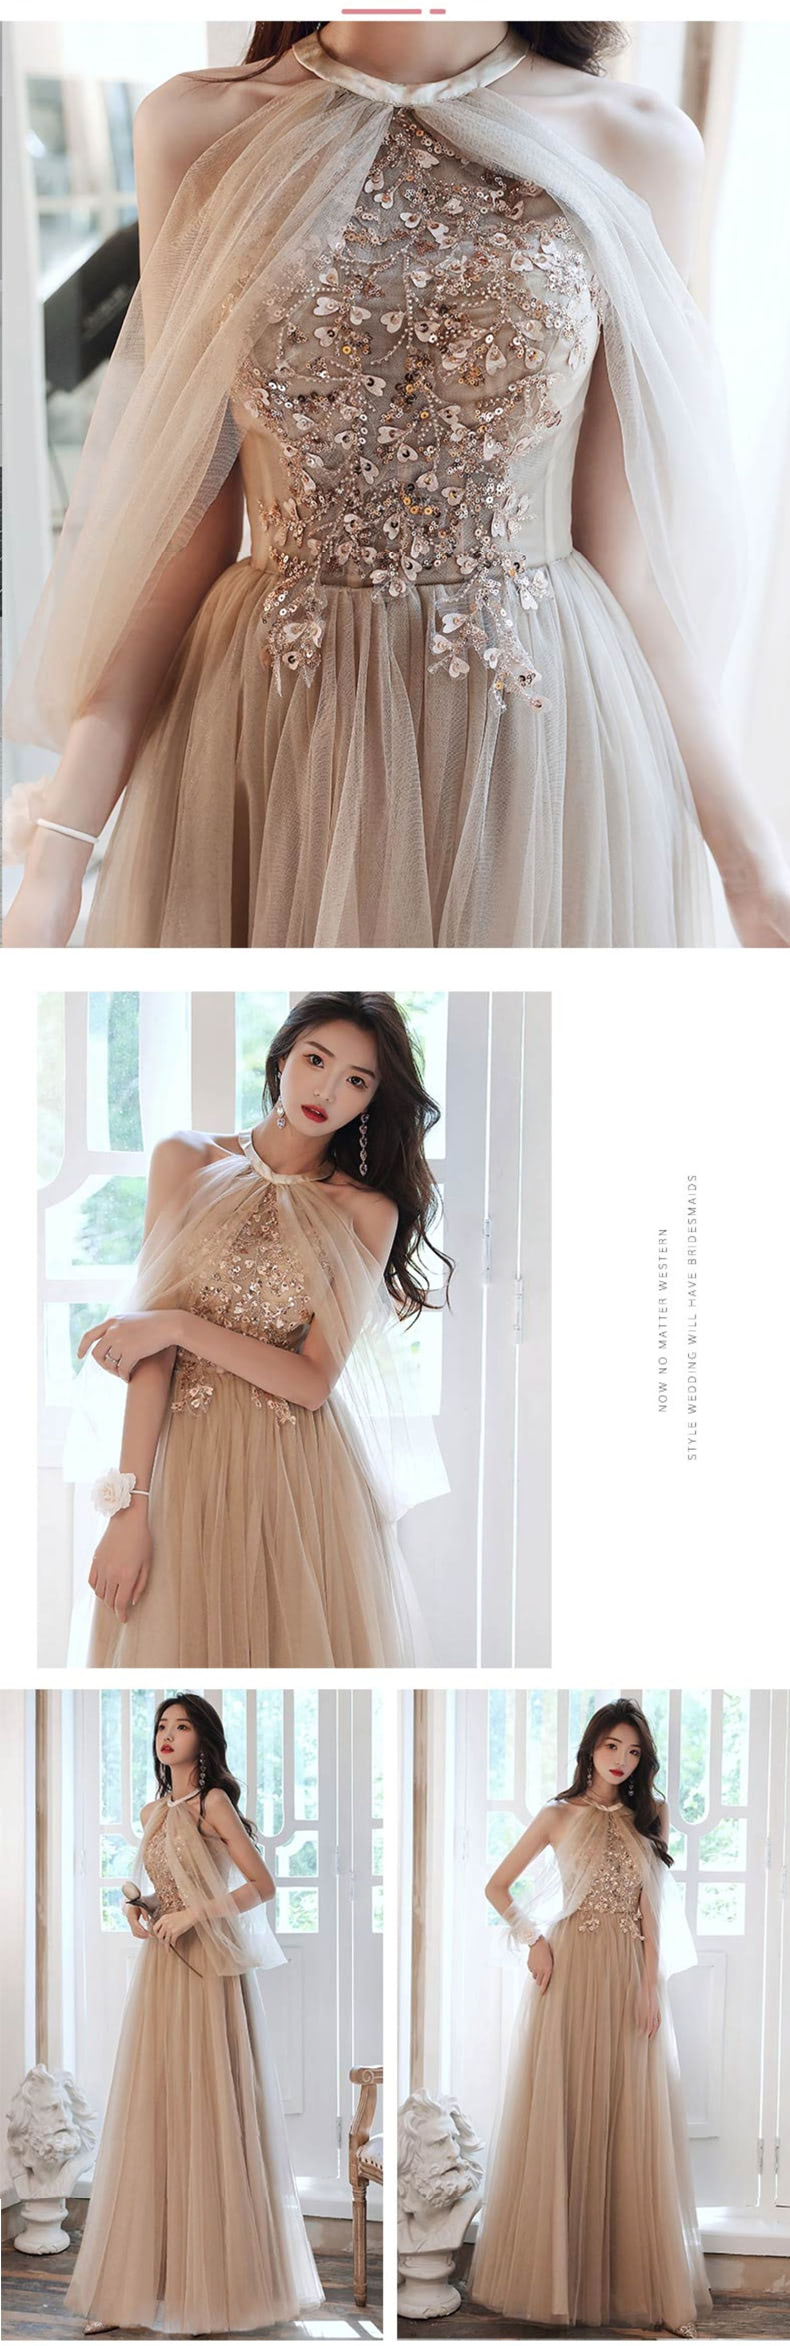 Charming-Embroidery-Ruffle-Lace-Long-Bridesmaid-Dress-Ball-Gown17.jpg